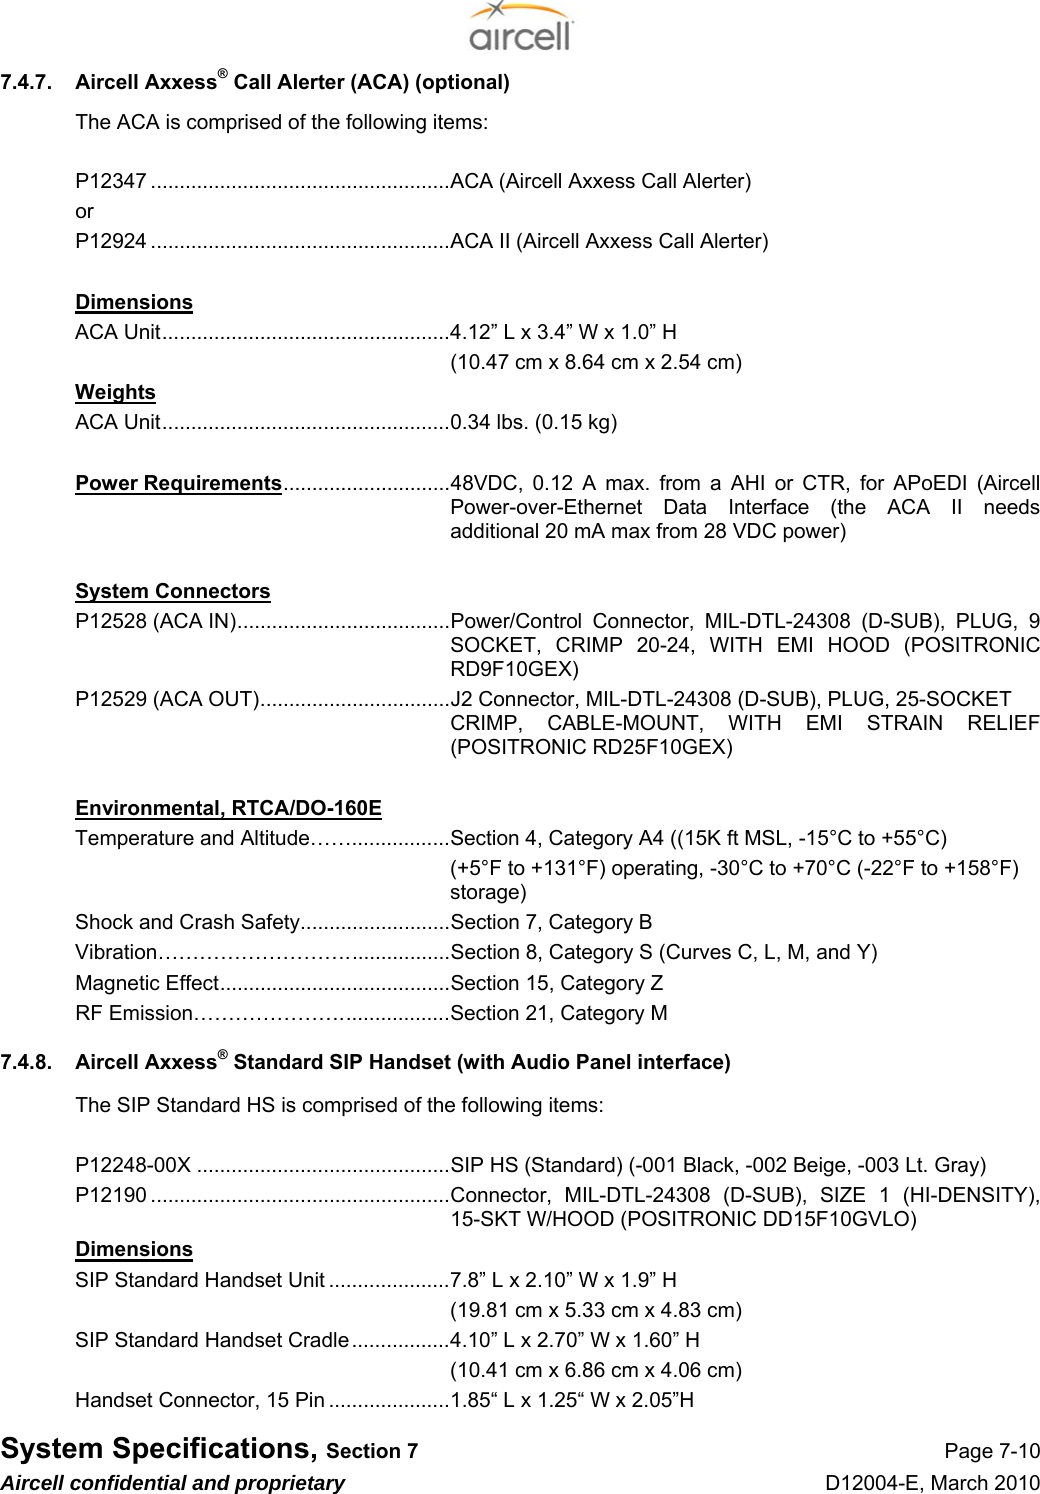  System Specifications, Section 7 Page 7-10 Aircell confidential and proprietary D12004-E, March 2010 7.4.7.  Aircell Axxess® Call Alerter (ACA) (optional) The ACA is comprised of the following items:  P12347 ....................................................ACA (Aircell Axxess Call Alerter) or P12924 ....................................................ACA II (Aircell Axxess Call Alerter)  Dimensions ACA Unit..................................................4.12” L x 3.4” W x 1.0” H   (10.47 cm x 8.64 cm x 2.54 cm) Weights ACA Unit..................................................0.34 lbs. (0.15 kg)  Power Requirements.............................48VDC, 0.12 A max. from a AHI or CTR, for APoEDI (Aircell Power-over-Ethernet Data Interface (the ACA II needs additional 20 mA max from 28 VDC power)  System Connectors P12528 (ACA IN).....................................Power/Control Connector, MIL-DTL-24308 (D-SUB), PLUG, 9 SOCKET, CRIMP 20-24, WITH EMI HOOD (POSITRONIC RD9F10GEX) P12529 (ACA OUT).................................J2 Connector, MIL-DTL-24308 (D-SUB), PLUG, 25-SOCKET CRIMP, CABLE-MOUNT, WITH EMI STRAIN RELIEF (POSITRONIC RD25F10GEX)  Environmental, RTCA/DO-160E Temperature and Altitude…….................Section 4, Category A4 ((15K ft MSL, -15°C to +55°C) (+5°F to +131°F) operating, -30°C to +70°C (-22°F to +158°F) storage) Shock and Crash Safety..........................Section 7, Category B Vibration………………………..................Section 8, Category S (Curves C, L, M, and Y) Magnetic Effect........................................Section 15, Category Z RF Emission…………………...................Section 21, Category M 7.4.8.  Aircell Axxess® Standard SIP Handset (with Audio Panel interface) The SIP Standard HS is comprised of the following items:  P12248-00X ............................................SIP HS (Standard) (-001 Black, -002 Beige, -003 Lt. Gray) P12190 ....................................................Connector, MIL-DTL-24308 (D-SUB), SIZE 1 (HI-DENSITY), 15-SKT W/HOOD (POSITRONIC DD15F10GVLO) Dimensions SIP Standard Handset Unit .....................7.8” L x 2.10” W x 1.9” H   (19.81 cm x 5.33 cm x 4.83 cm) SIP Standard Handset Cradle.................4.10” L x 2.70” W x 1.60” H   (10.41 cm x 6.86 cm x 4.06 cm) Handset Connector, 15 Pin .....................1.85“ L x 1.25“ W x 2.05”H 